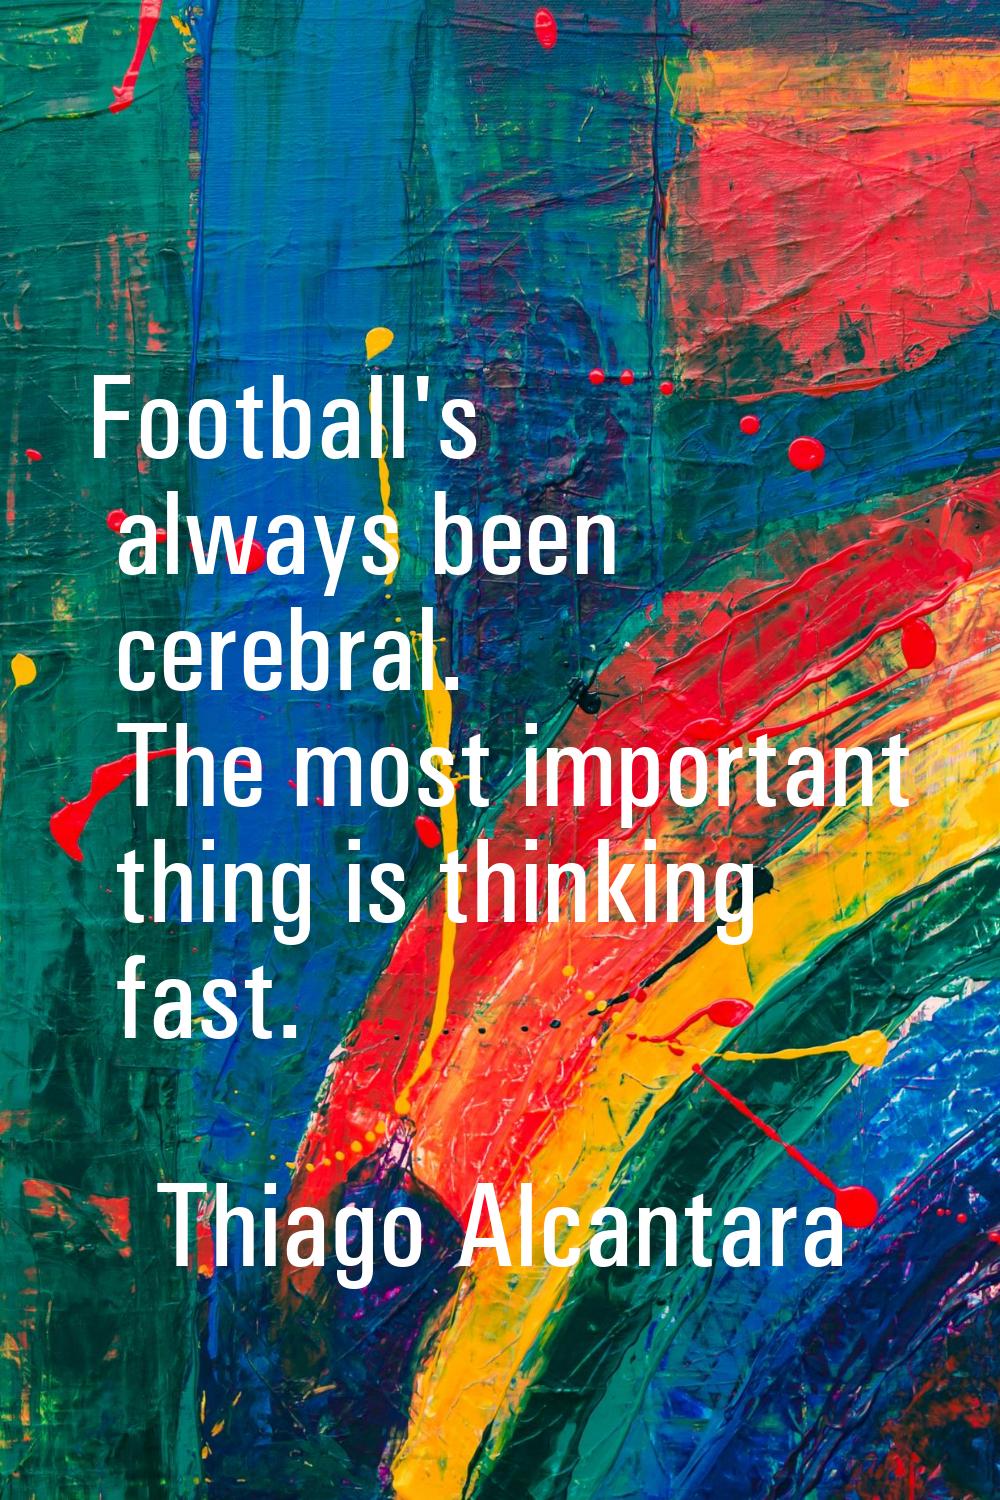 Football's always been cerebral. The most important thing is thinking fast.